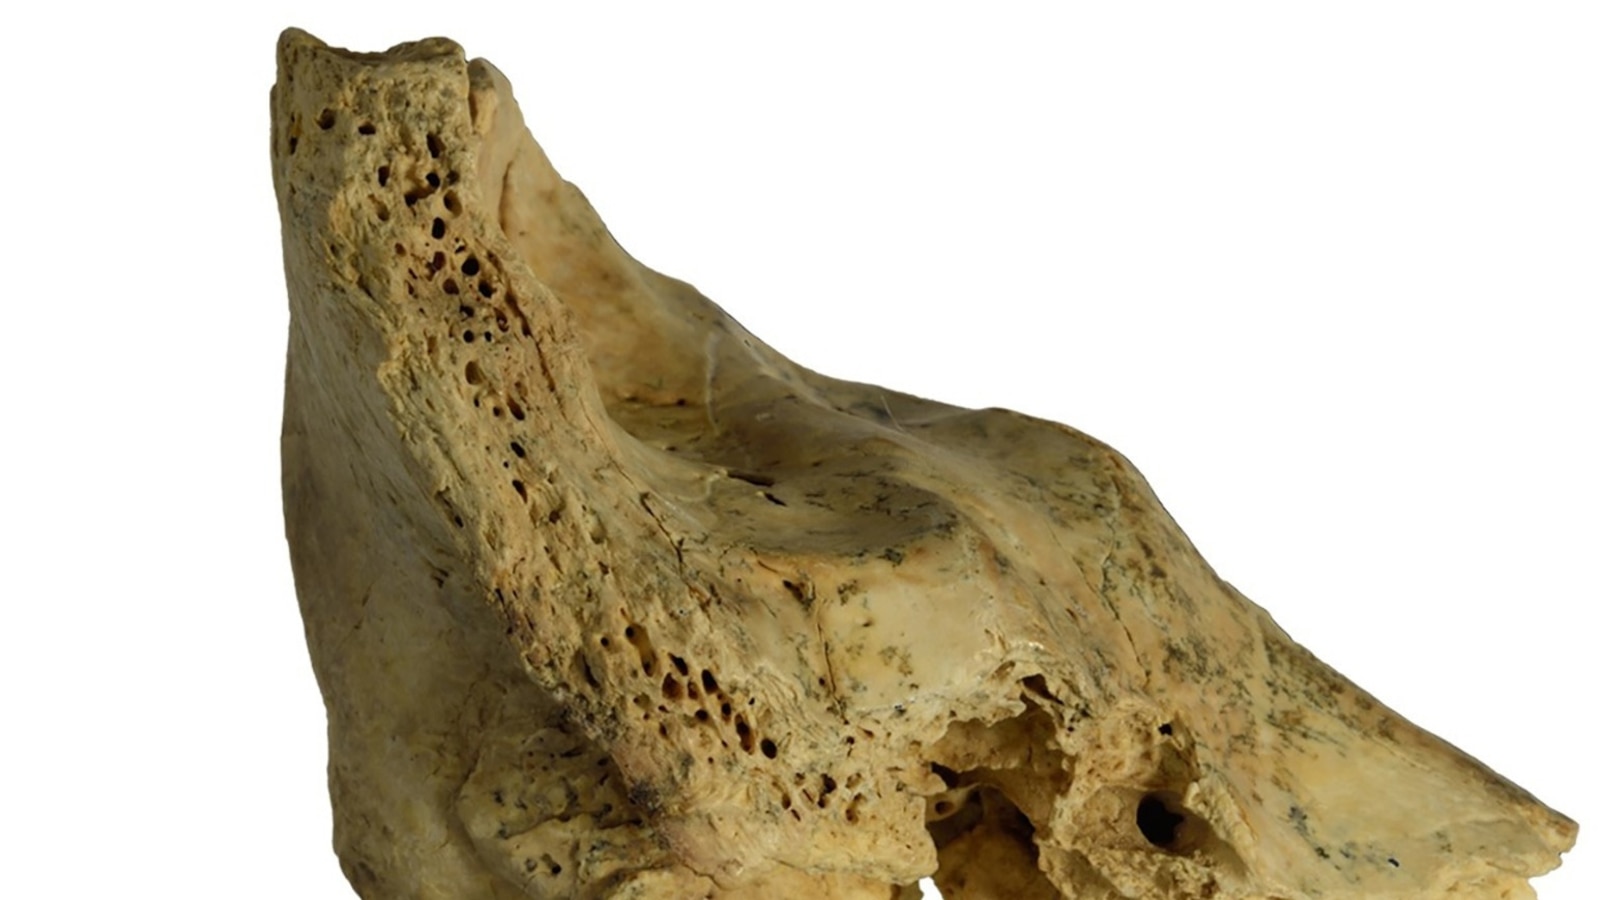 Fossilized skull of Neanderthal child with Down syndrome reveals communal caregiving among species [Video]